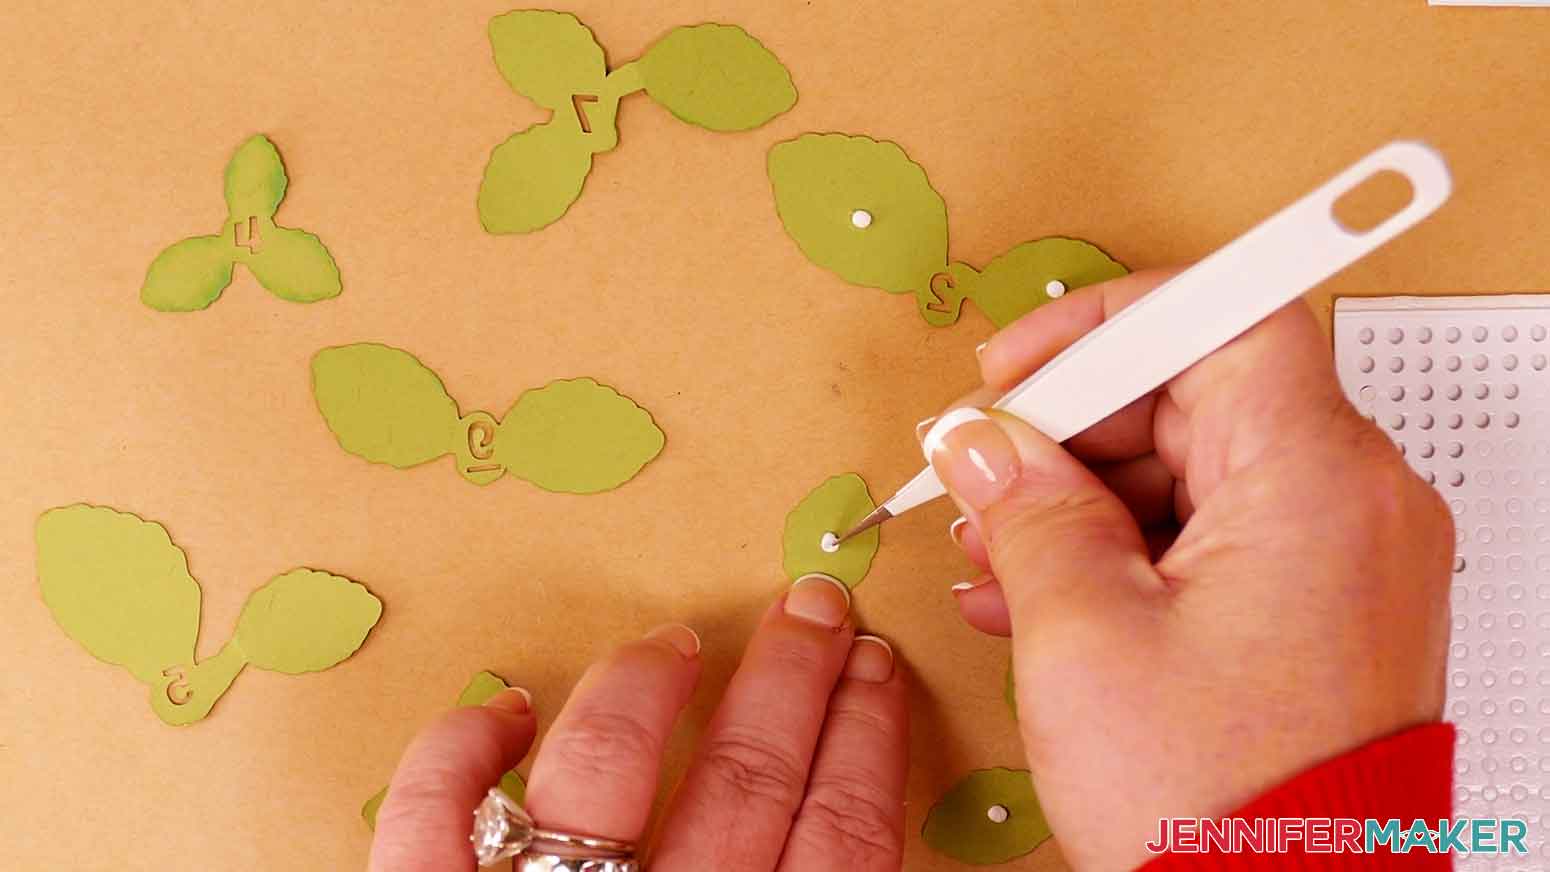 Place foam adhesive on the back side of the light green leaf layer for the cherry blossom leaves.